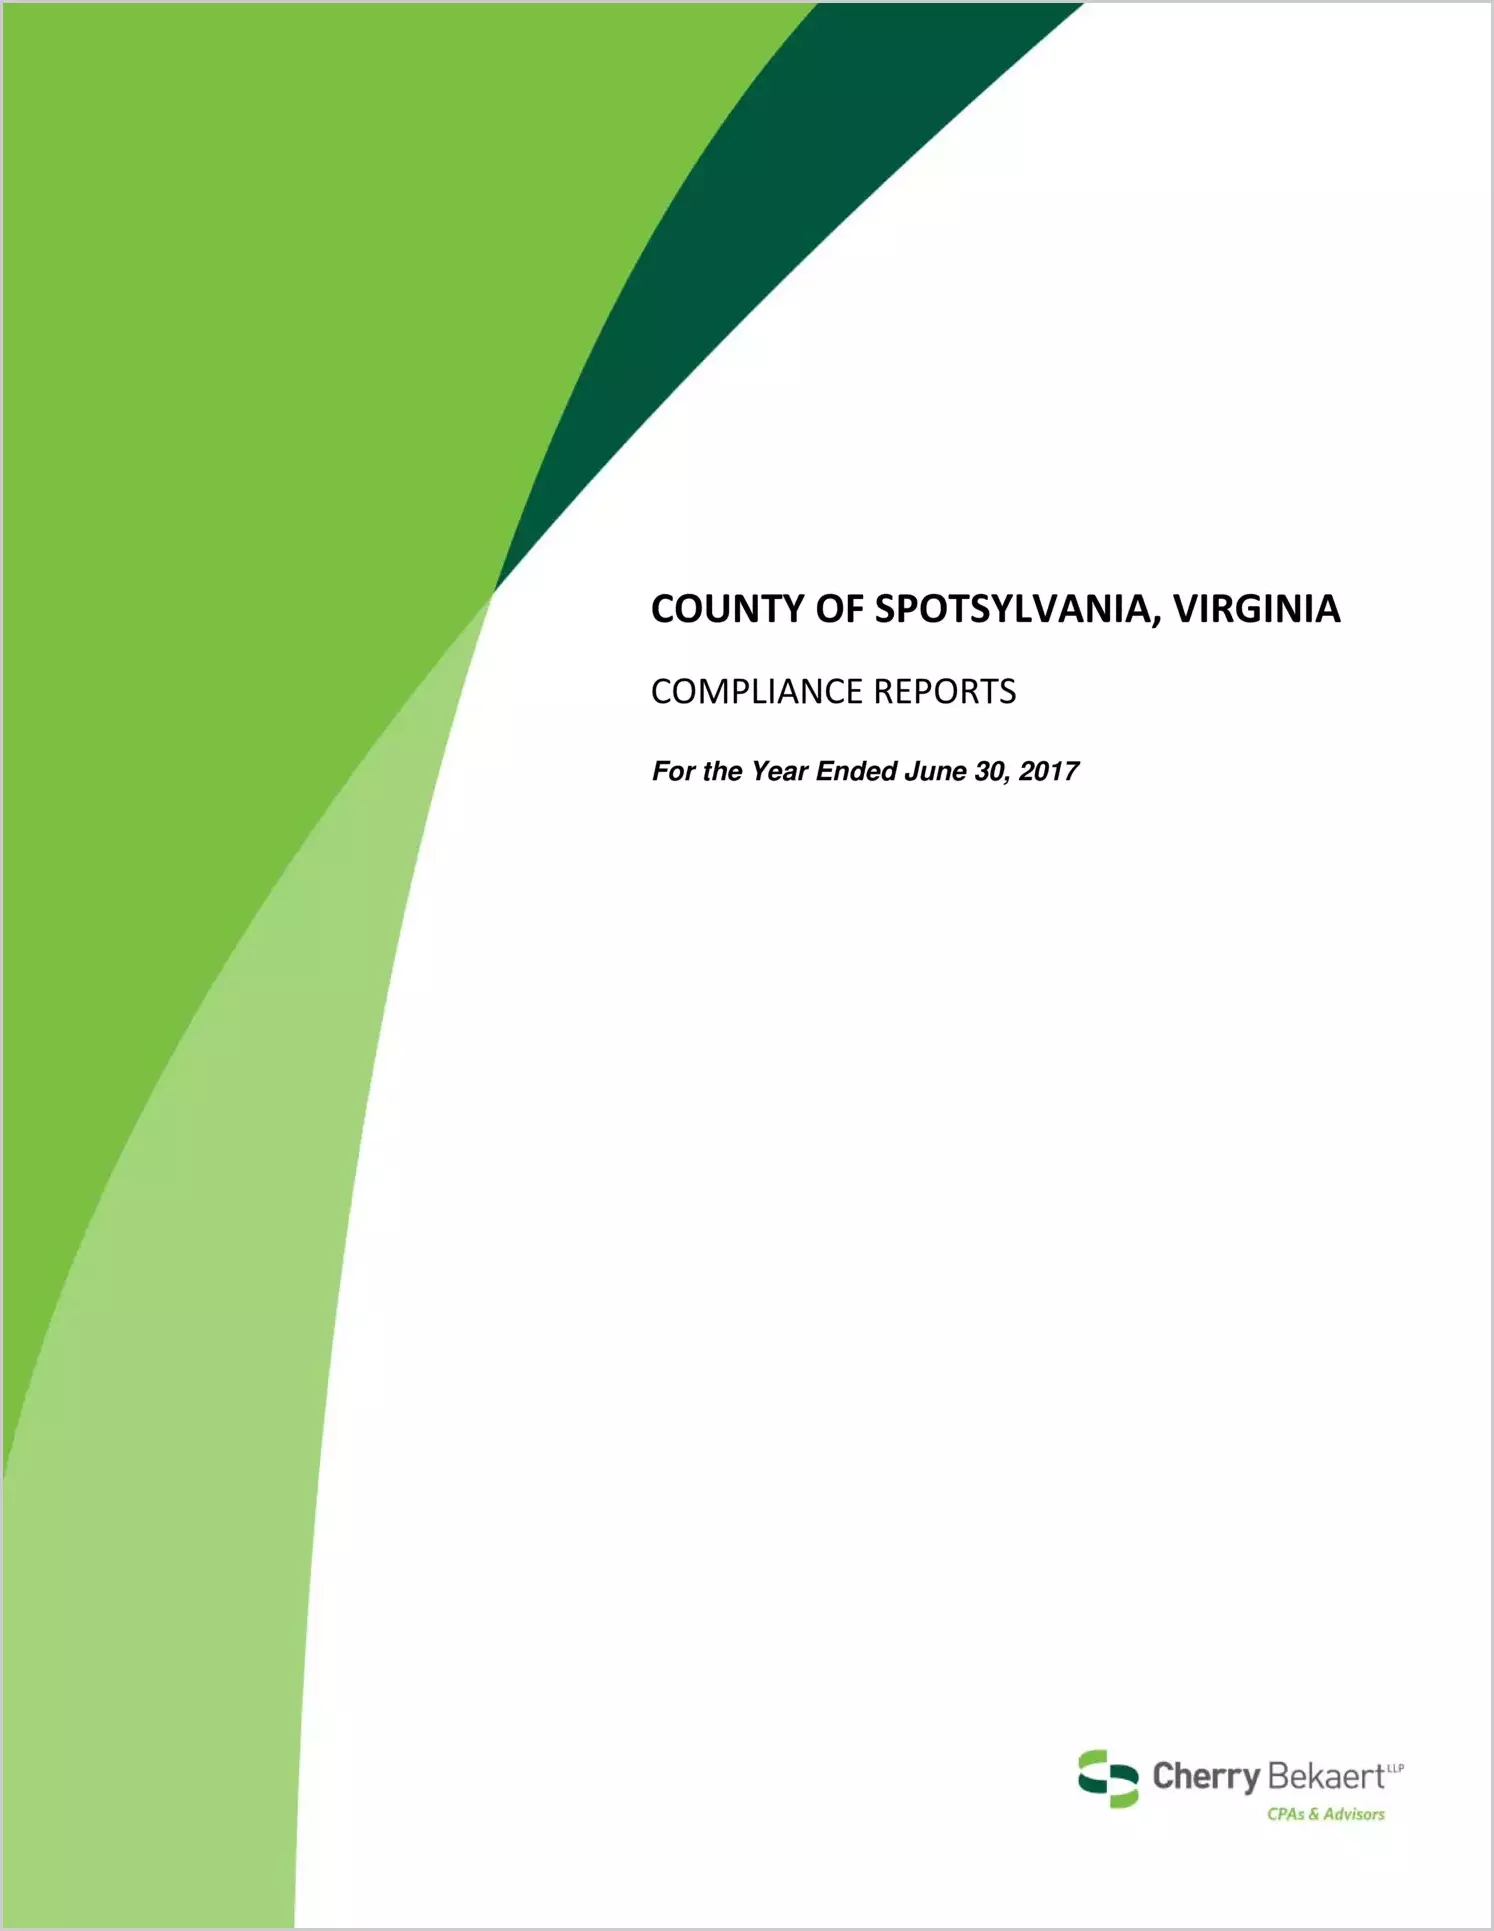 2017 Internal Control and Compliance Report for County of Spotsylvania